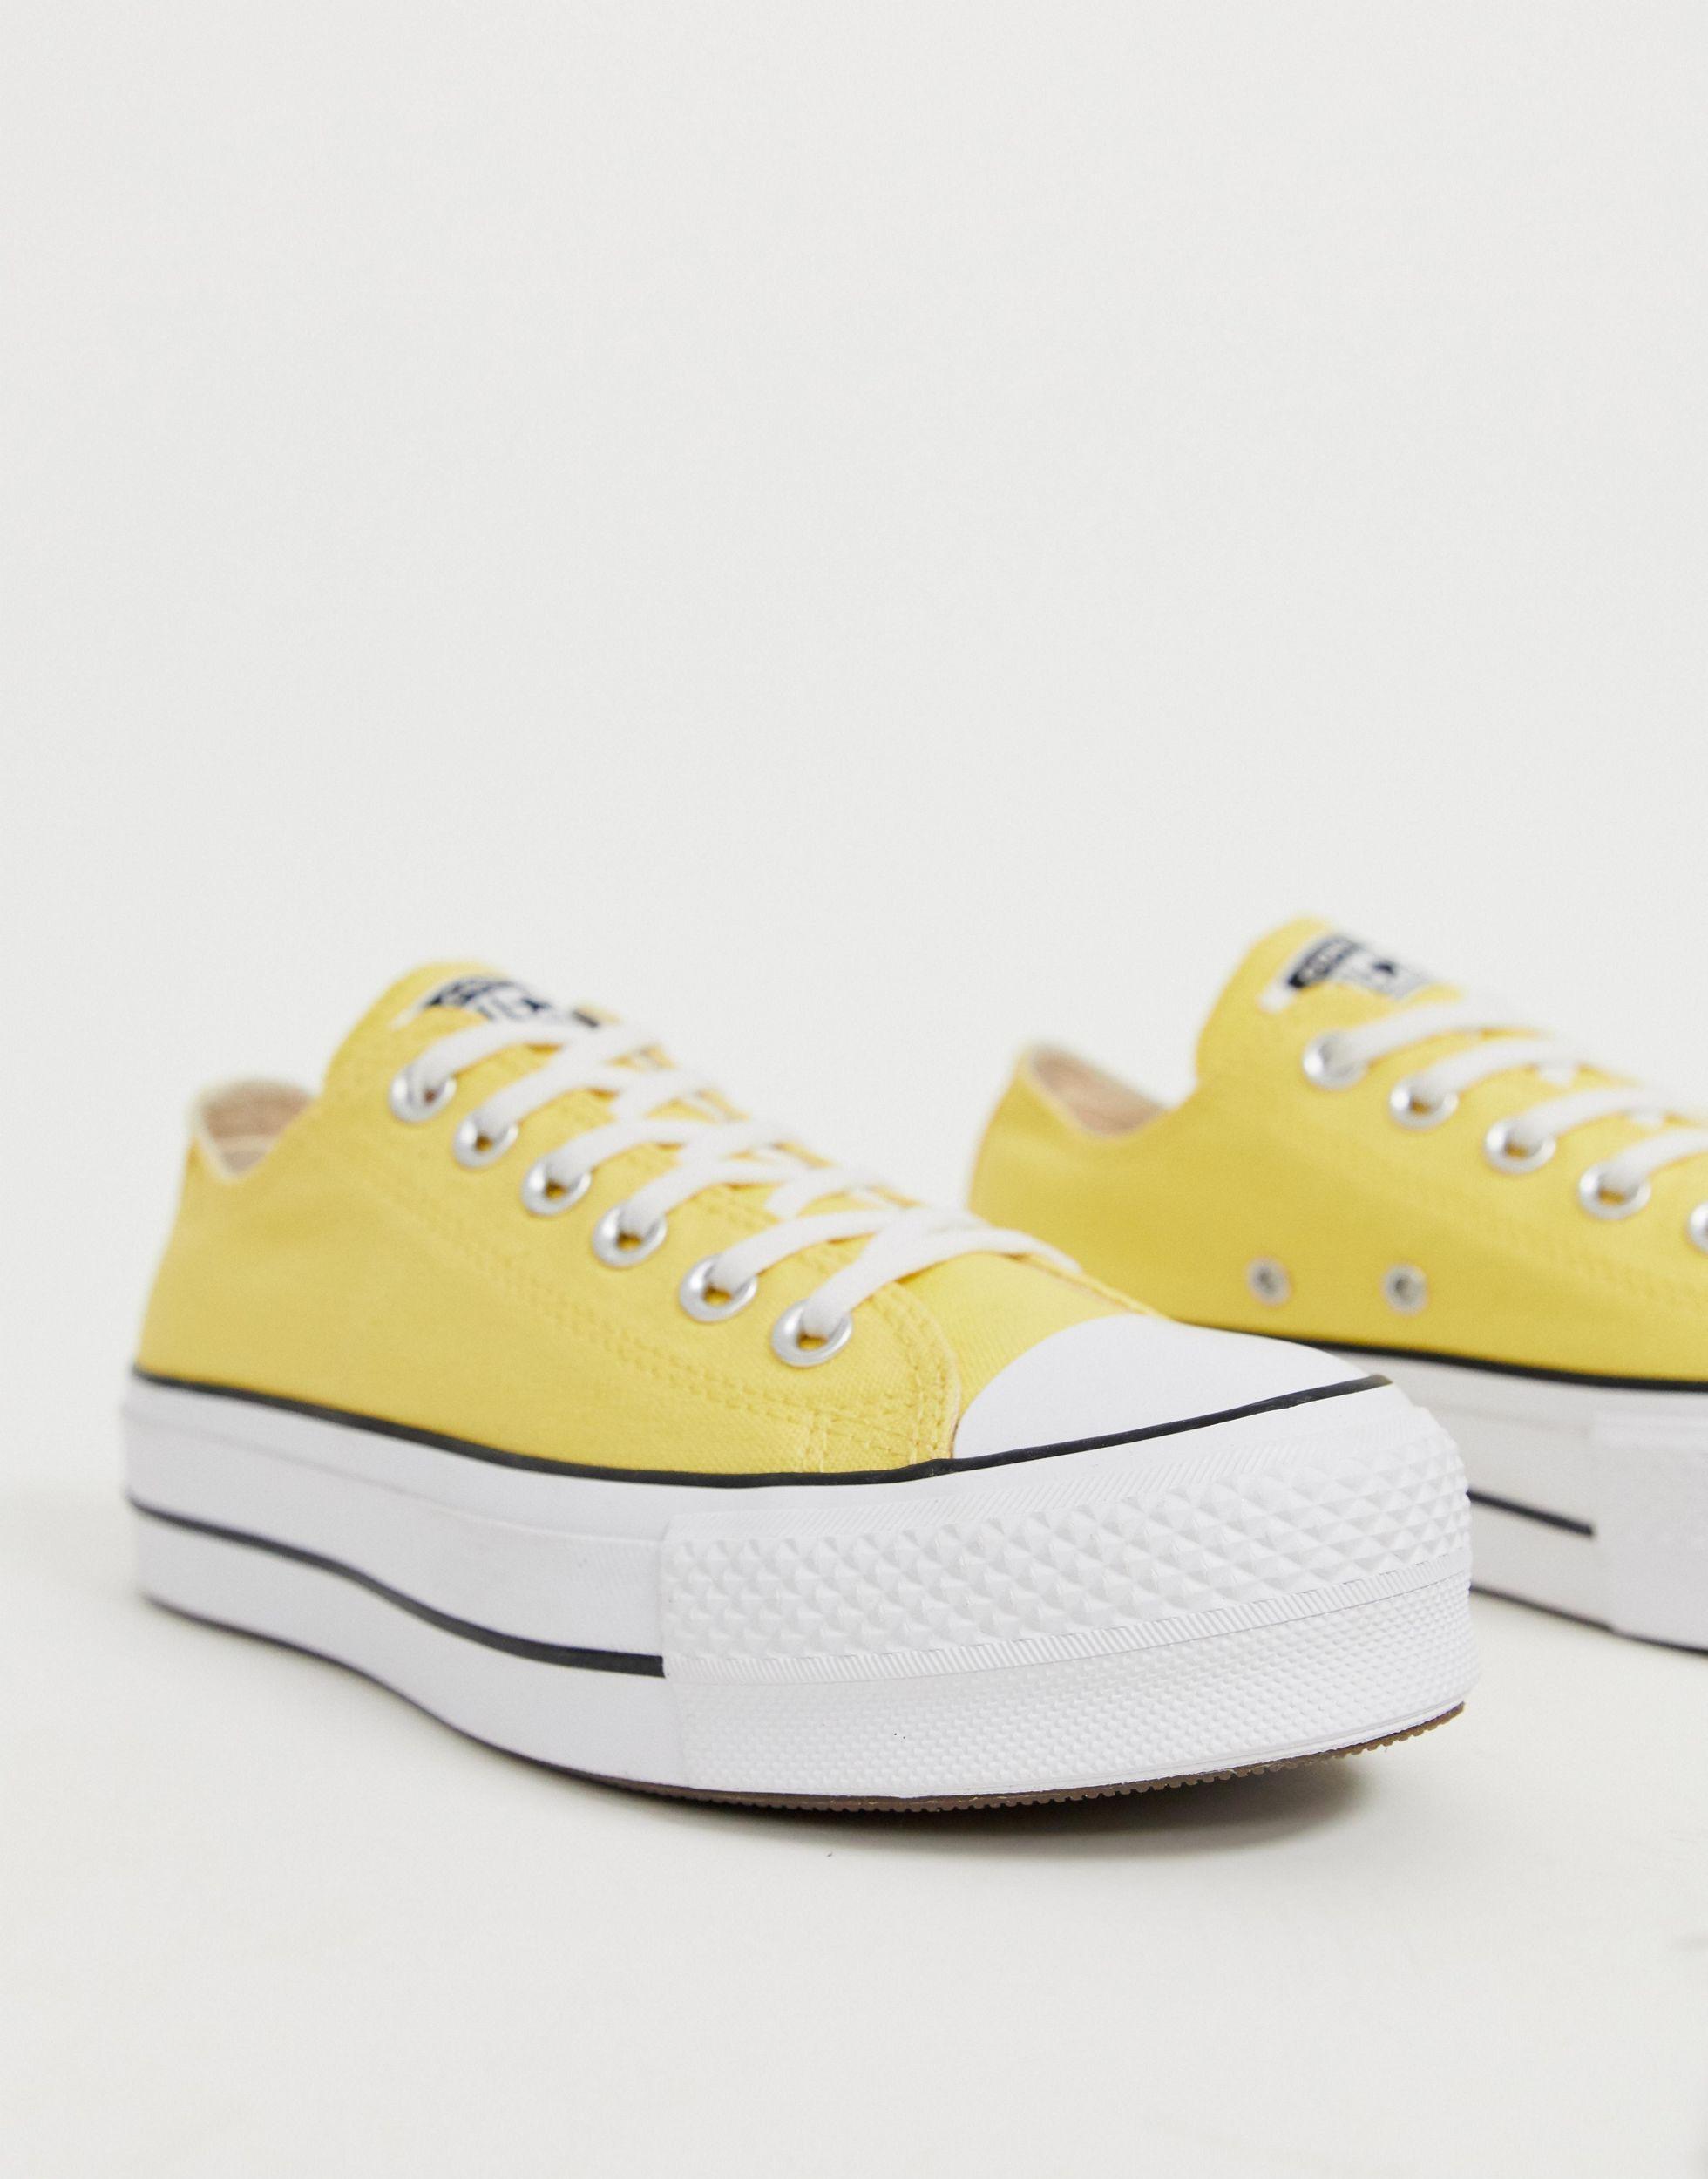 Converse Chuck Taylor All Star Lo Yellow Platform Trainers | Lyst